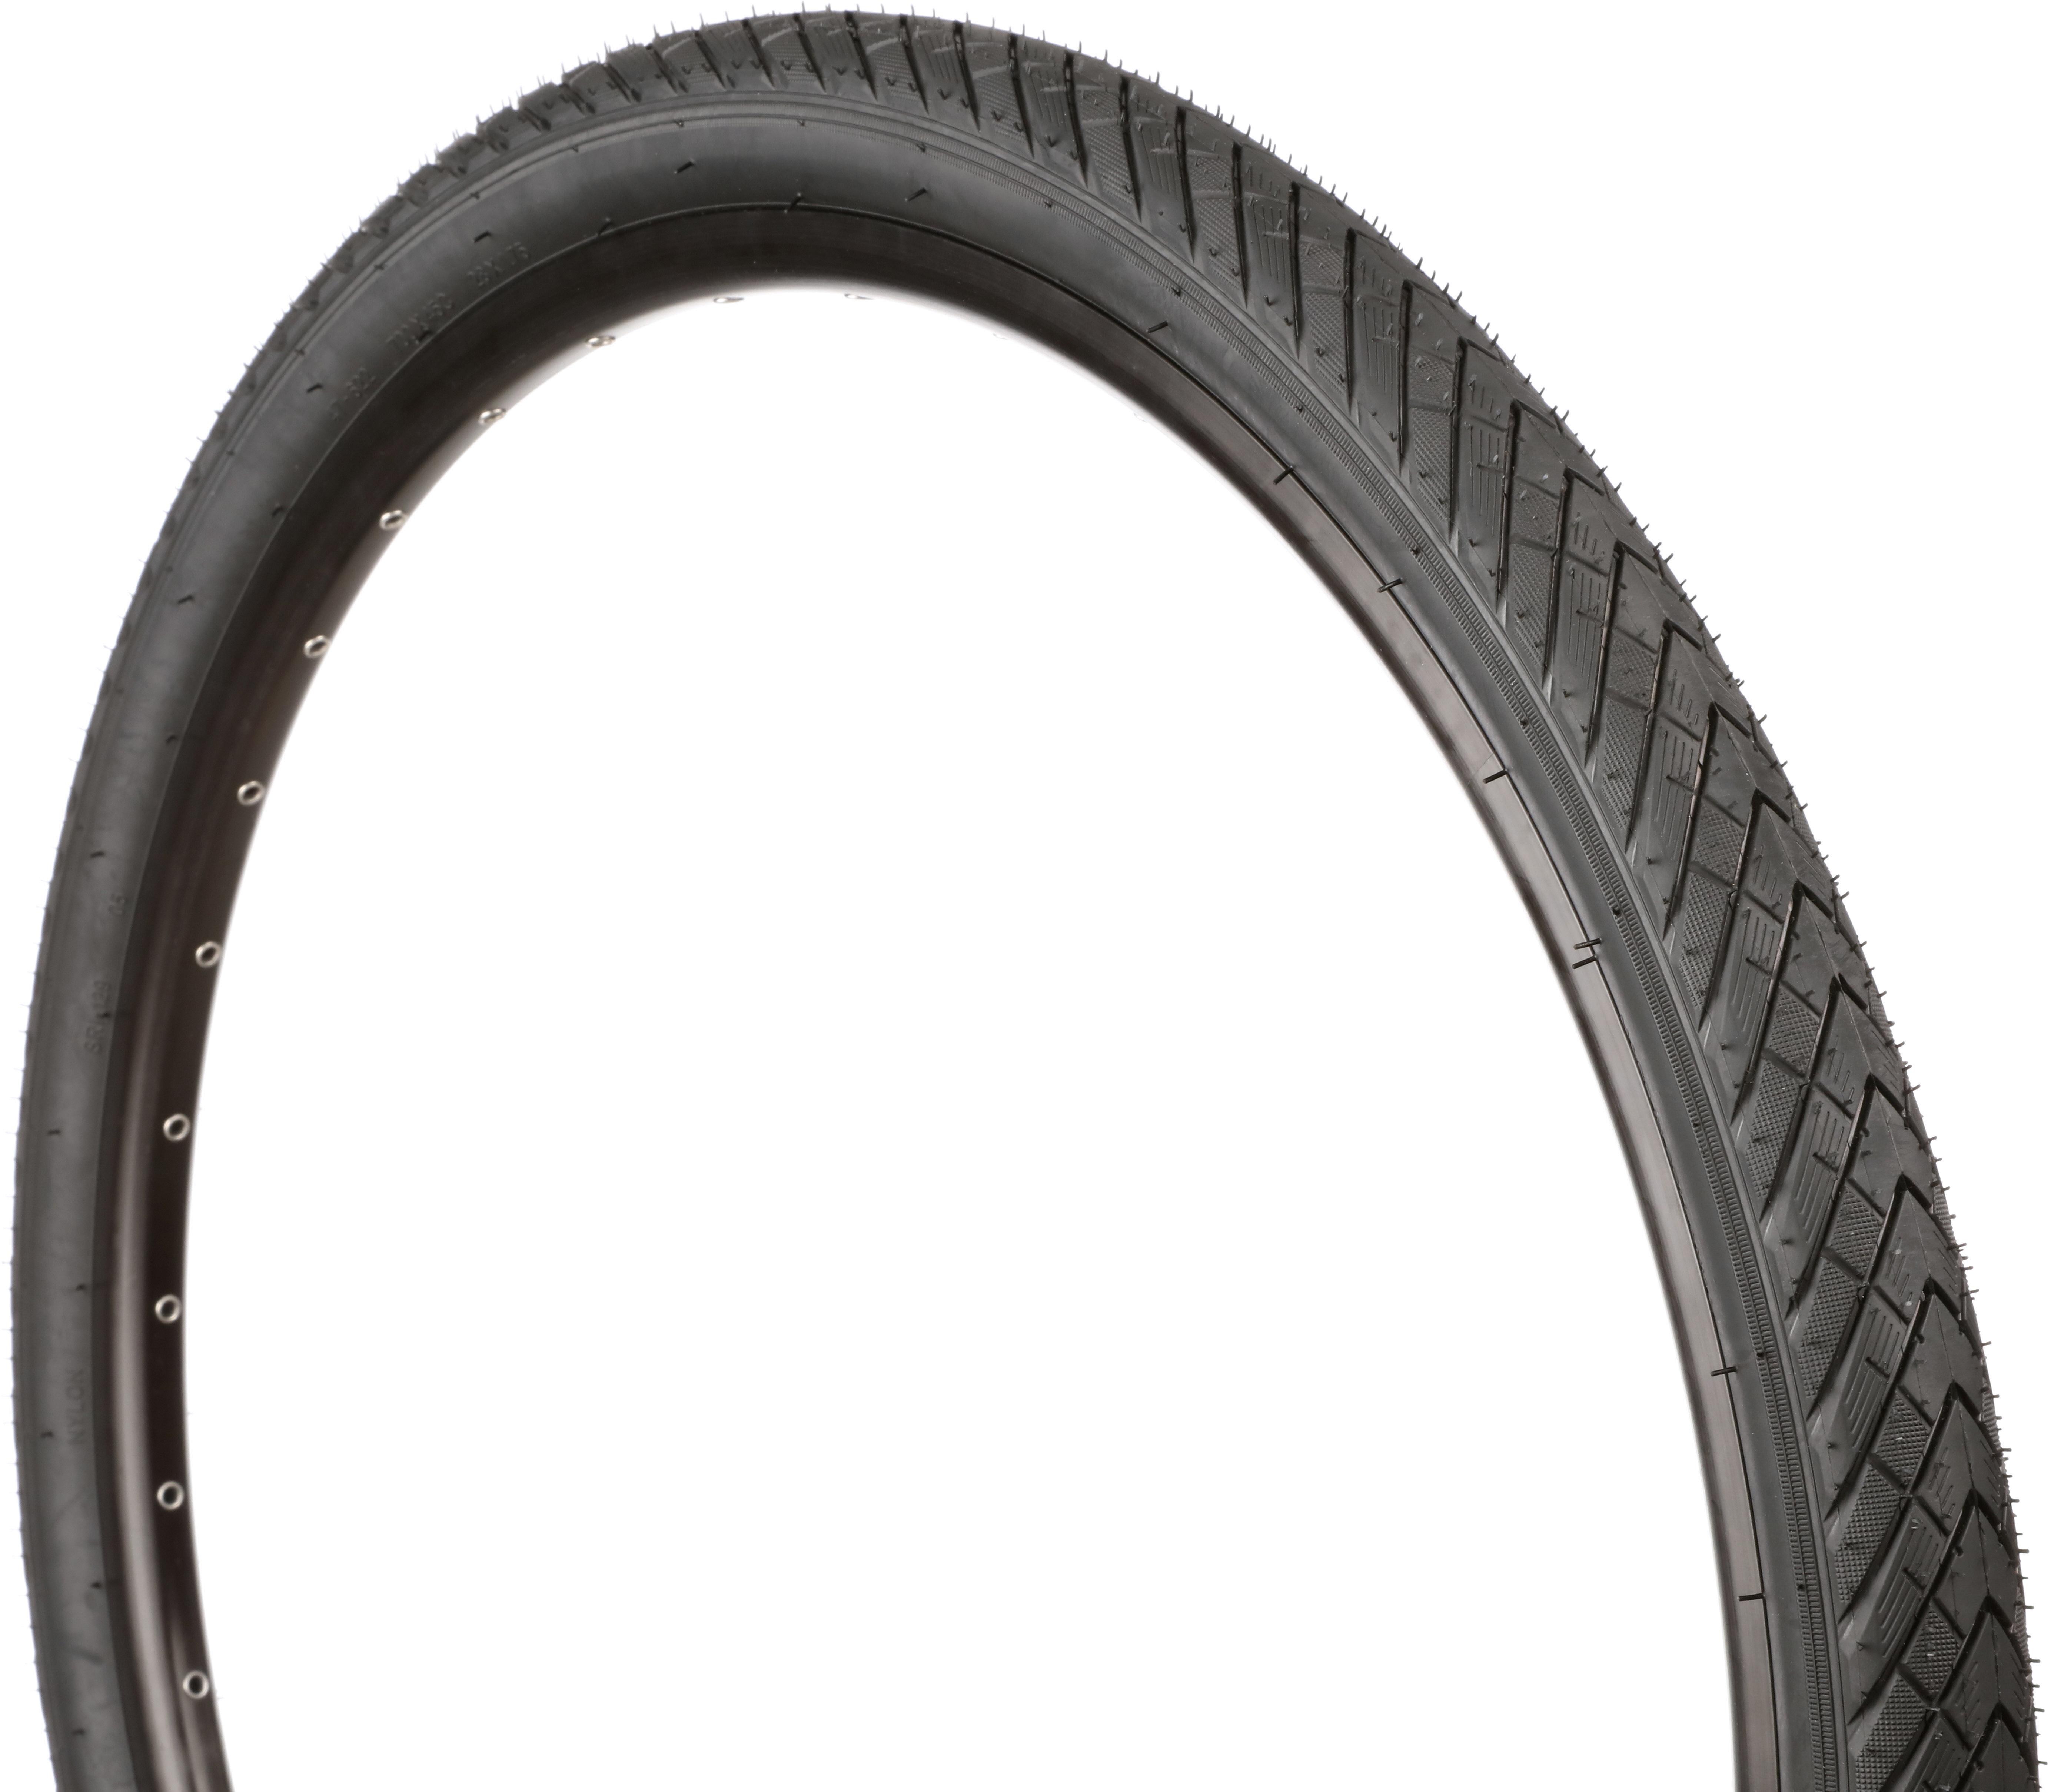 Halfords Hybrid Bike Tyre 700C X 45C With Puncture Protect